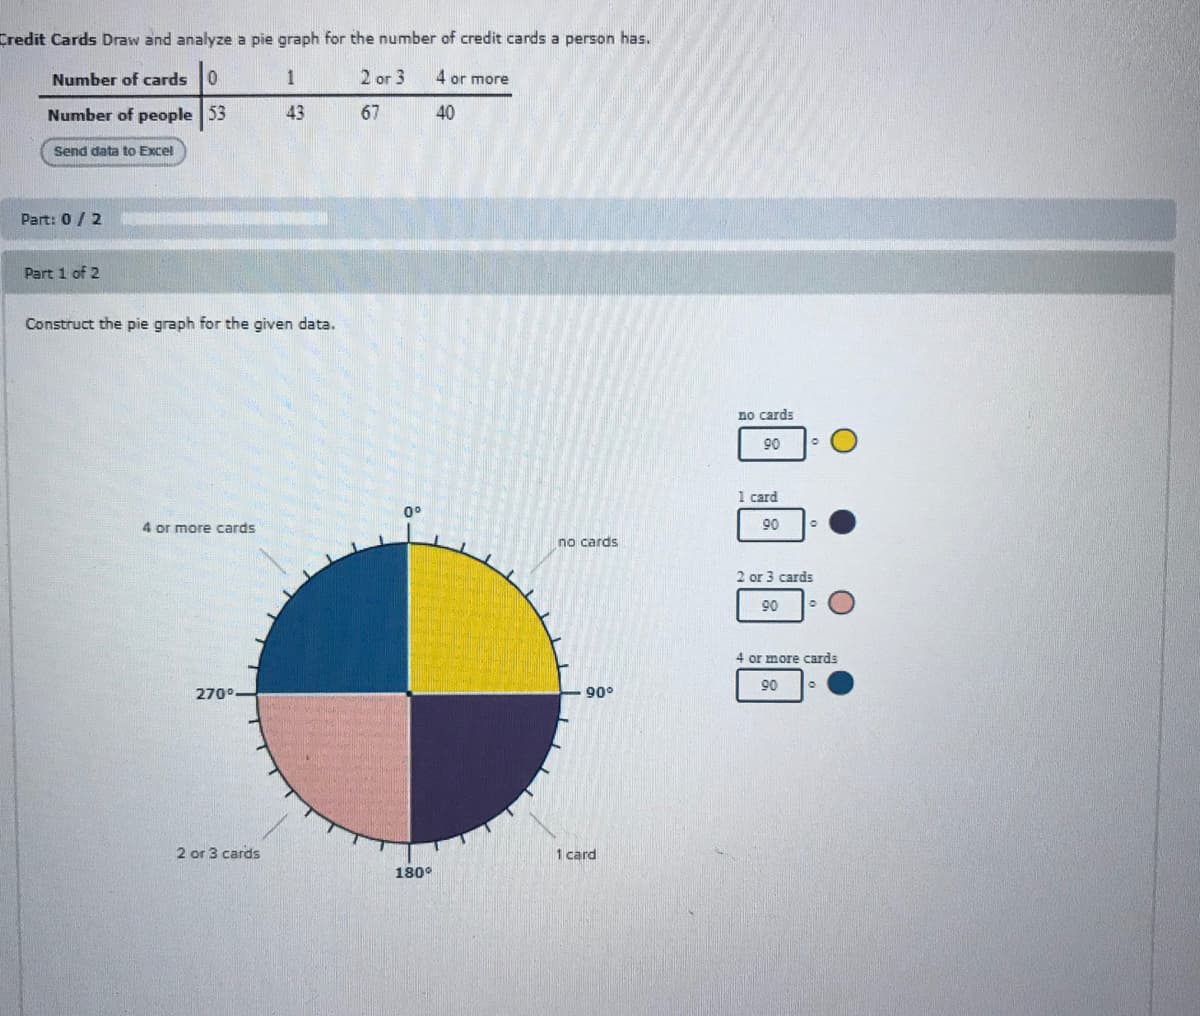 Credit Cards Draw and analyze a pie graph for the number of credit cards a person has.
Number of cards 0
1
2 or 3
4 or more
Number of people 53
43
67
40
Send data to Excel
Part: 0/2
Part 1 of 2
Construct the pie graph for the given data.
no cards
90
1 card
0°
4 or more cards
90
no cards
2 or 3 cards
90
4 or more cards
90
270°.
90°
2 or 3 cards
1 card
180°
